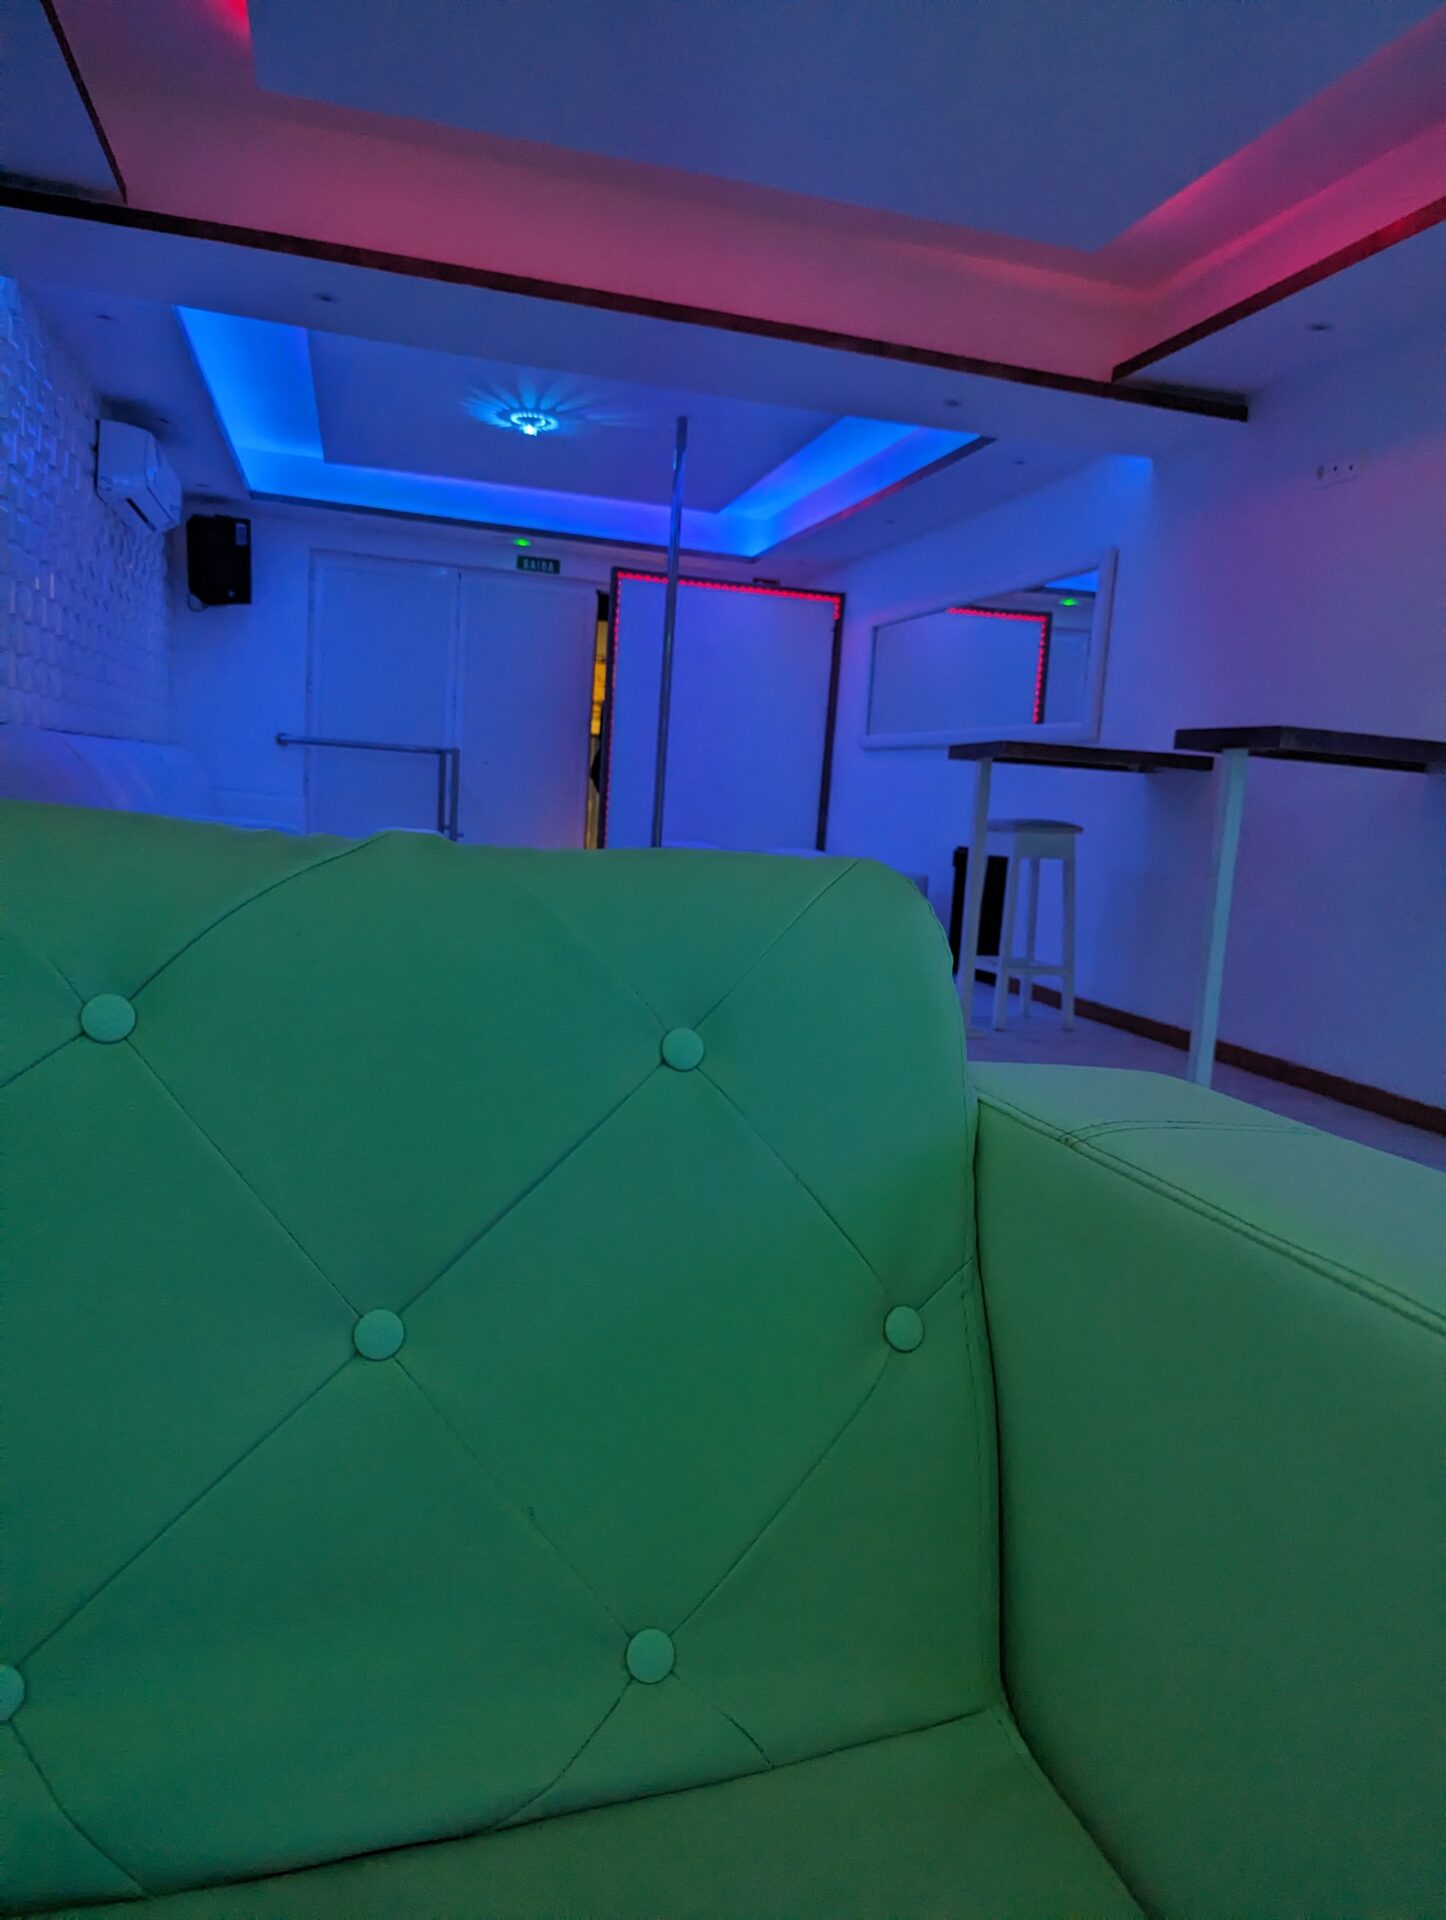 a green couch in a room with lights